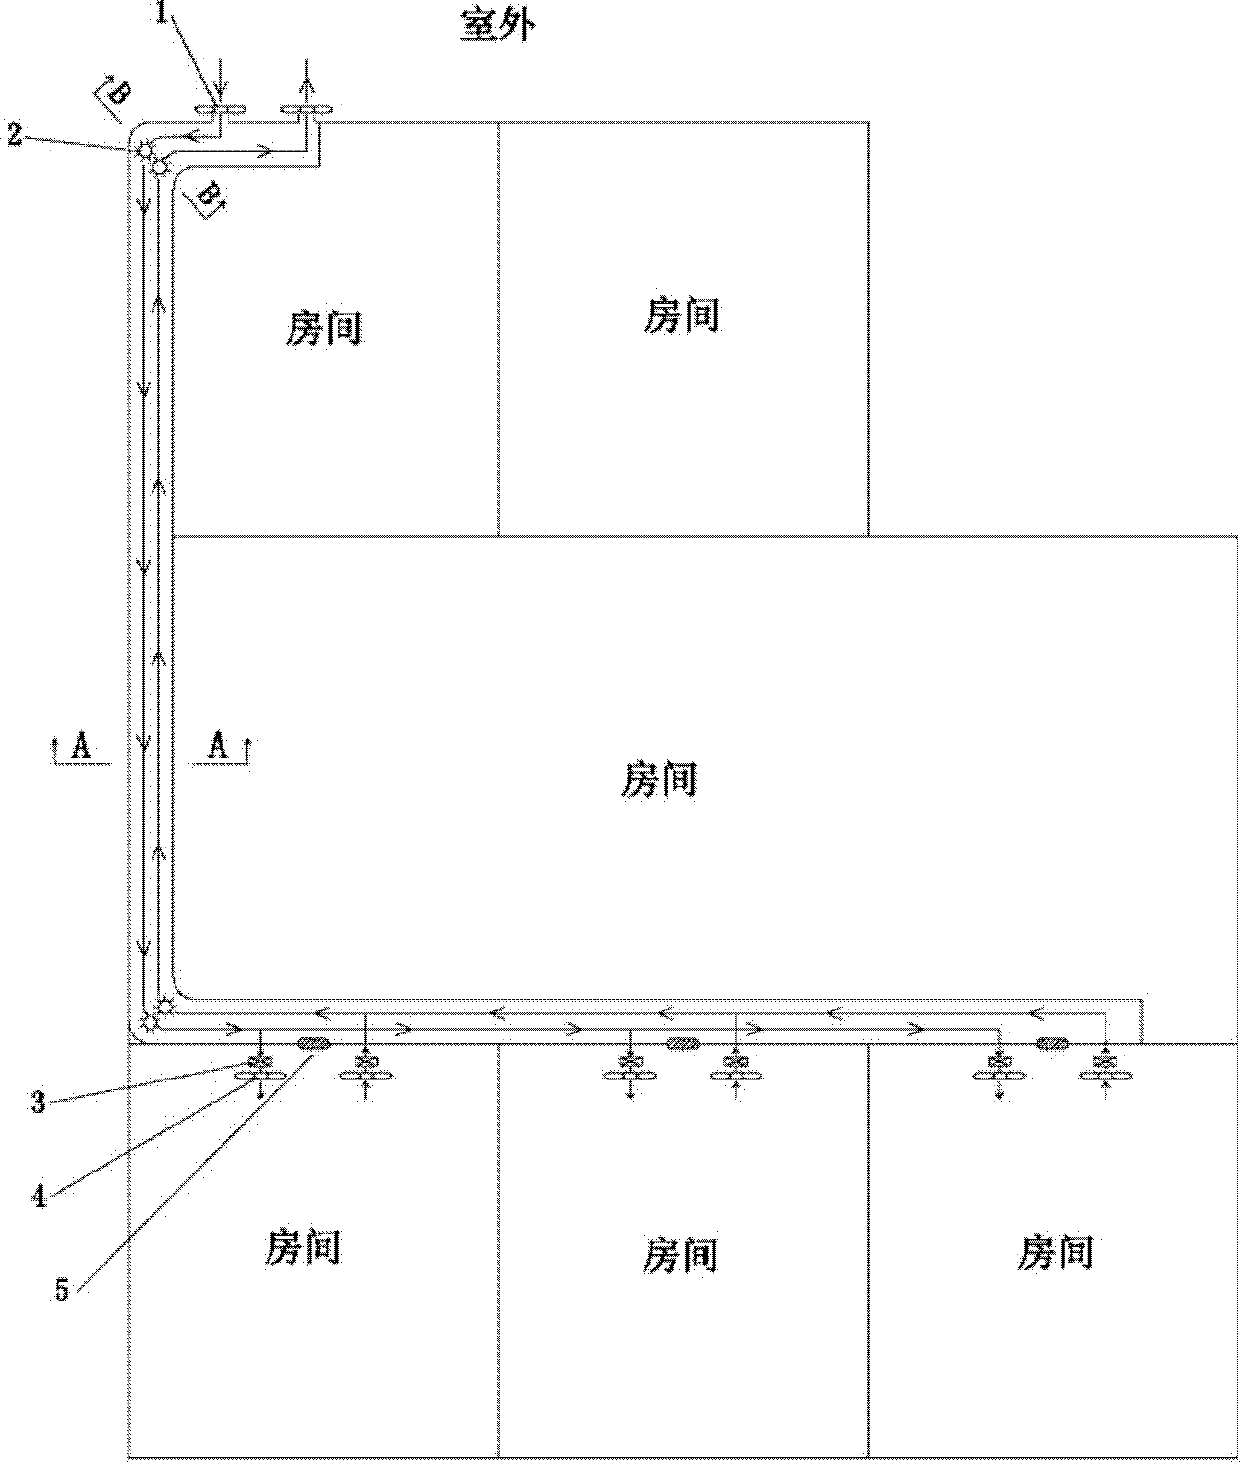 Linear special-shaped pipe type building heat exchange and ventilation system